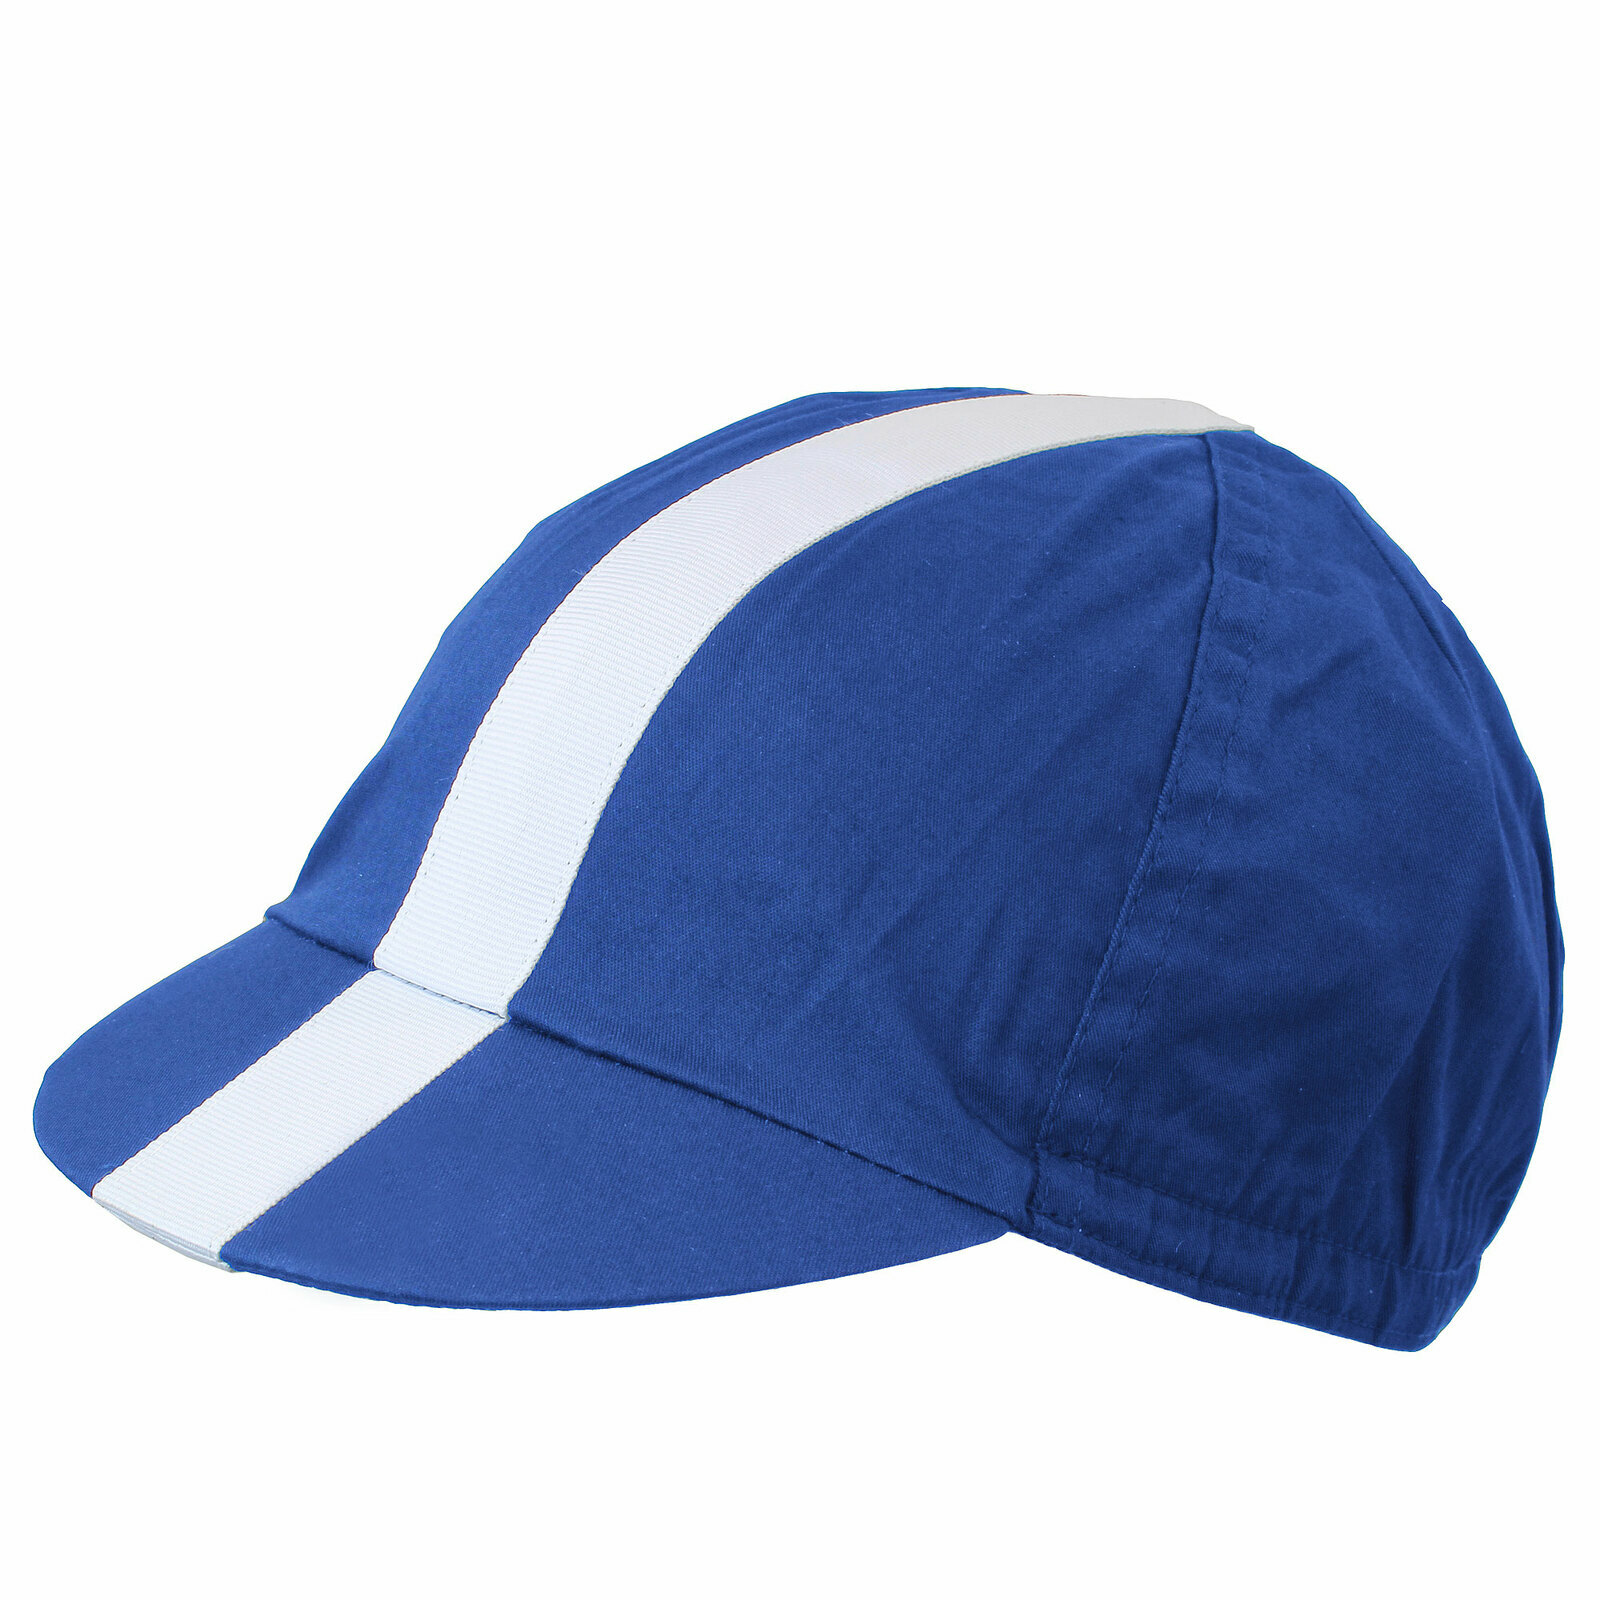 Cyclingdeal Cycling Outdoor Hat Cap Blue